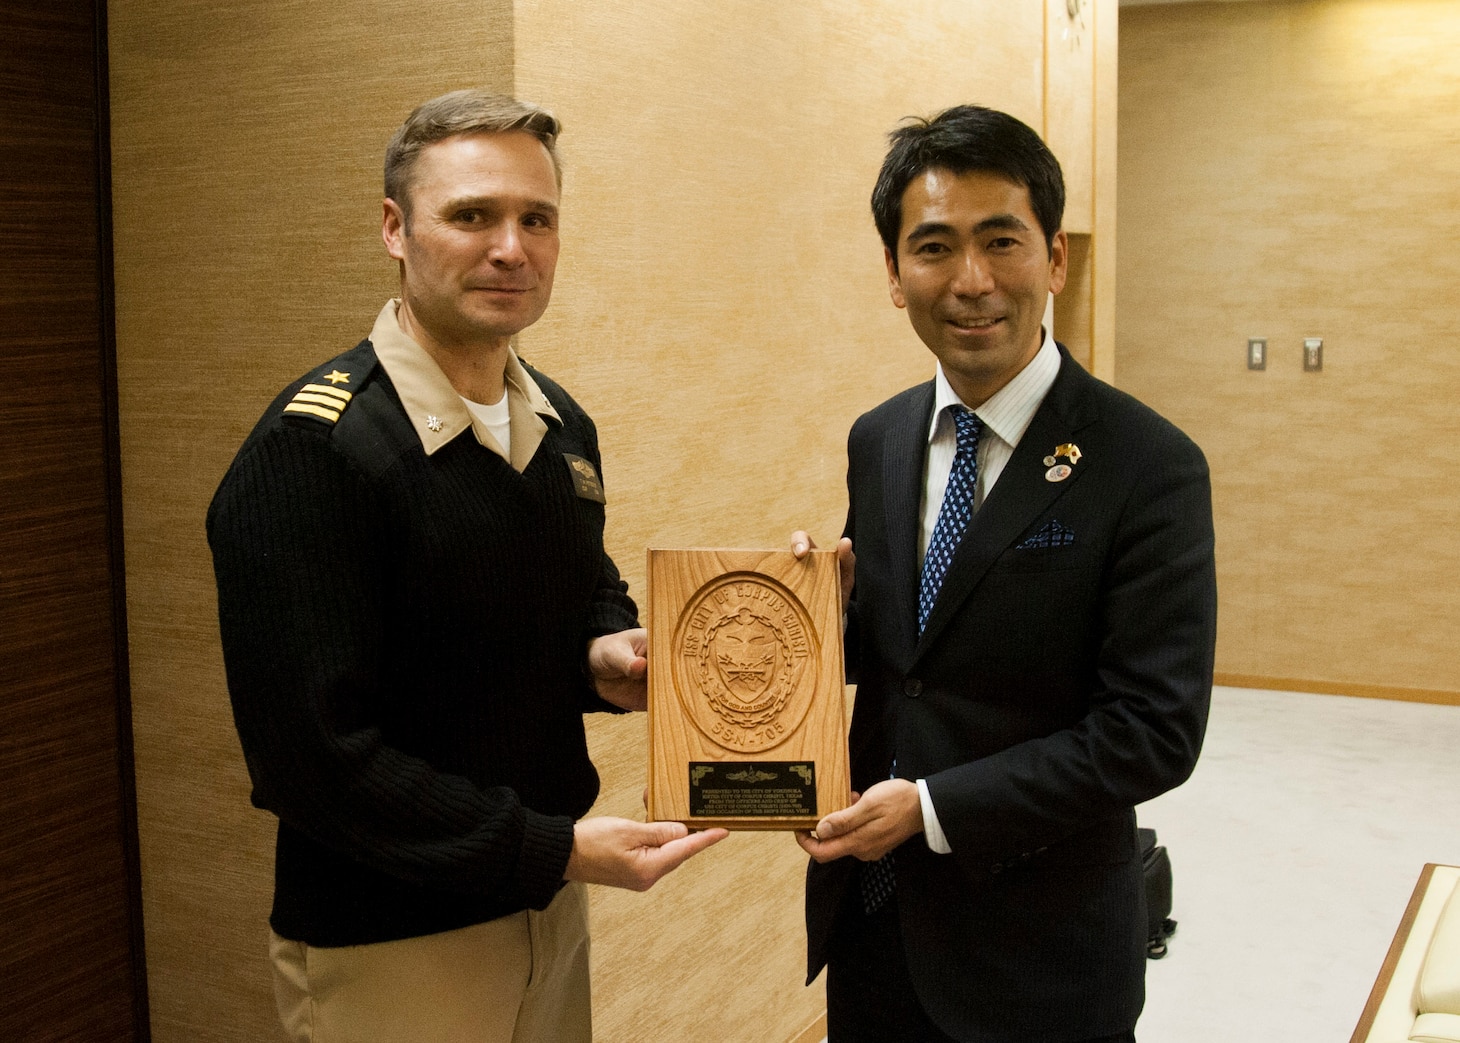 160113-N-ED185-036
YOKOSUKA, Japan (Jan. 13, 2016) Cmdr. Travis Petzoldt, commanding officer of the Los Angeles-class fast-attack submarine USS Corpus Christi (SSN 705), presents a plaque to Mayor Yuto Yoshida, City of Yokosuka, at the Yokosuka City Hall. The two leaders met to commemorate the sister cities relationship between the city of Corpus Christi and Yokosuka. This is City of Corpus Christi’s last port visit to Japan prior to the boat’s decommissioning. (U.S. Navy photo by Mass Communication Specialist 2nd Class Brian G. Reynolds/Released)
